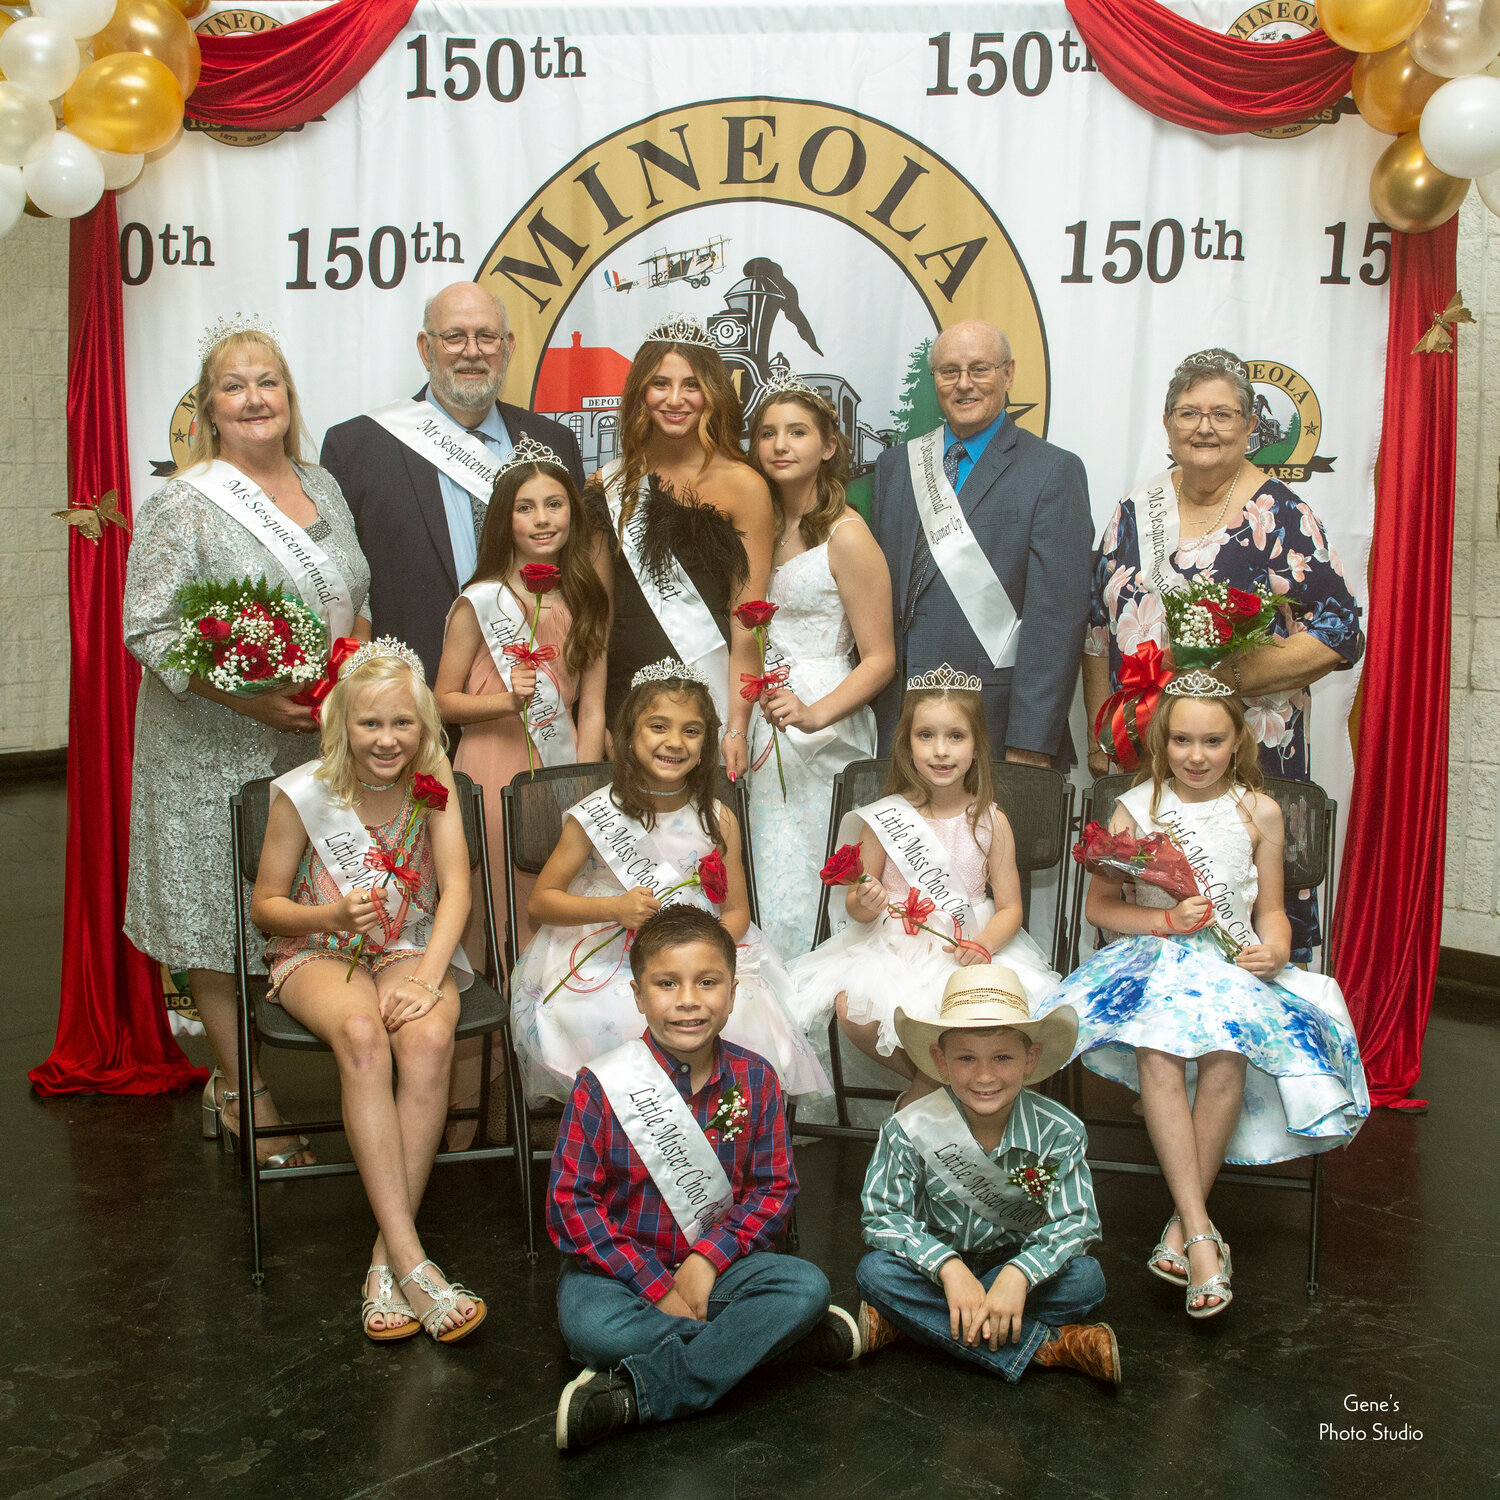 Contestants for the Mineola Sesquicentennial royal court which was crowned Saturday include, back from left, Martha Holmes, Gordon Tiner, Greenly Herrington, Valerie Moreland, Lillian Moreland, Sam Curry, Janell Abbott; seated, Aspyn Brown, Galilea Gonzalez, Lolo Clower, Tatum Hubbard; and on floor, Eli Calixto and Kyler Moore.